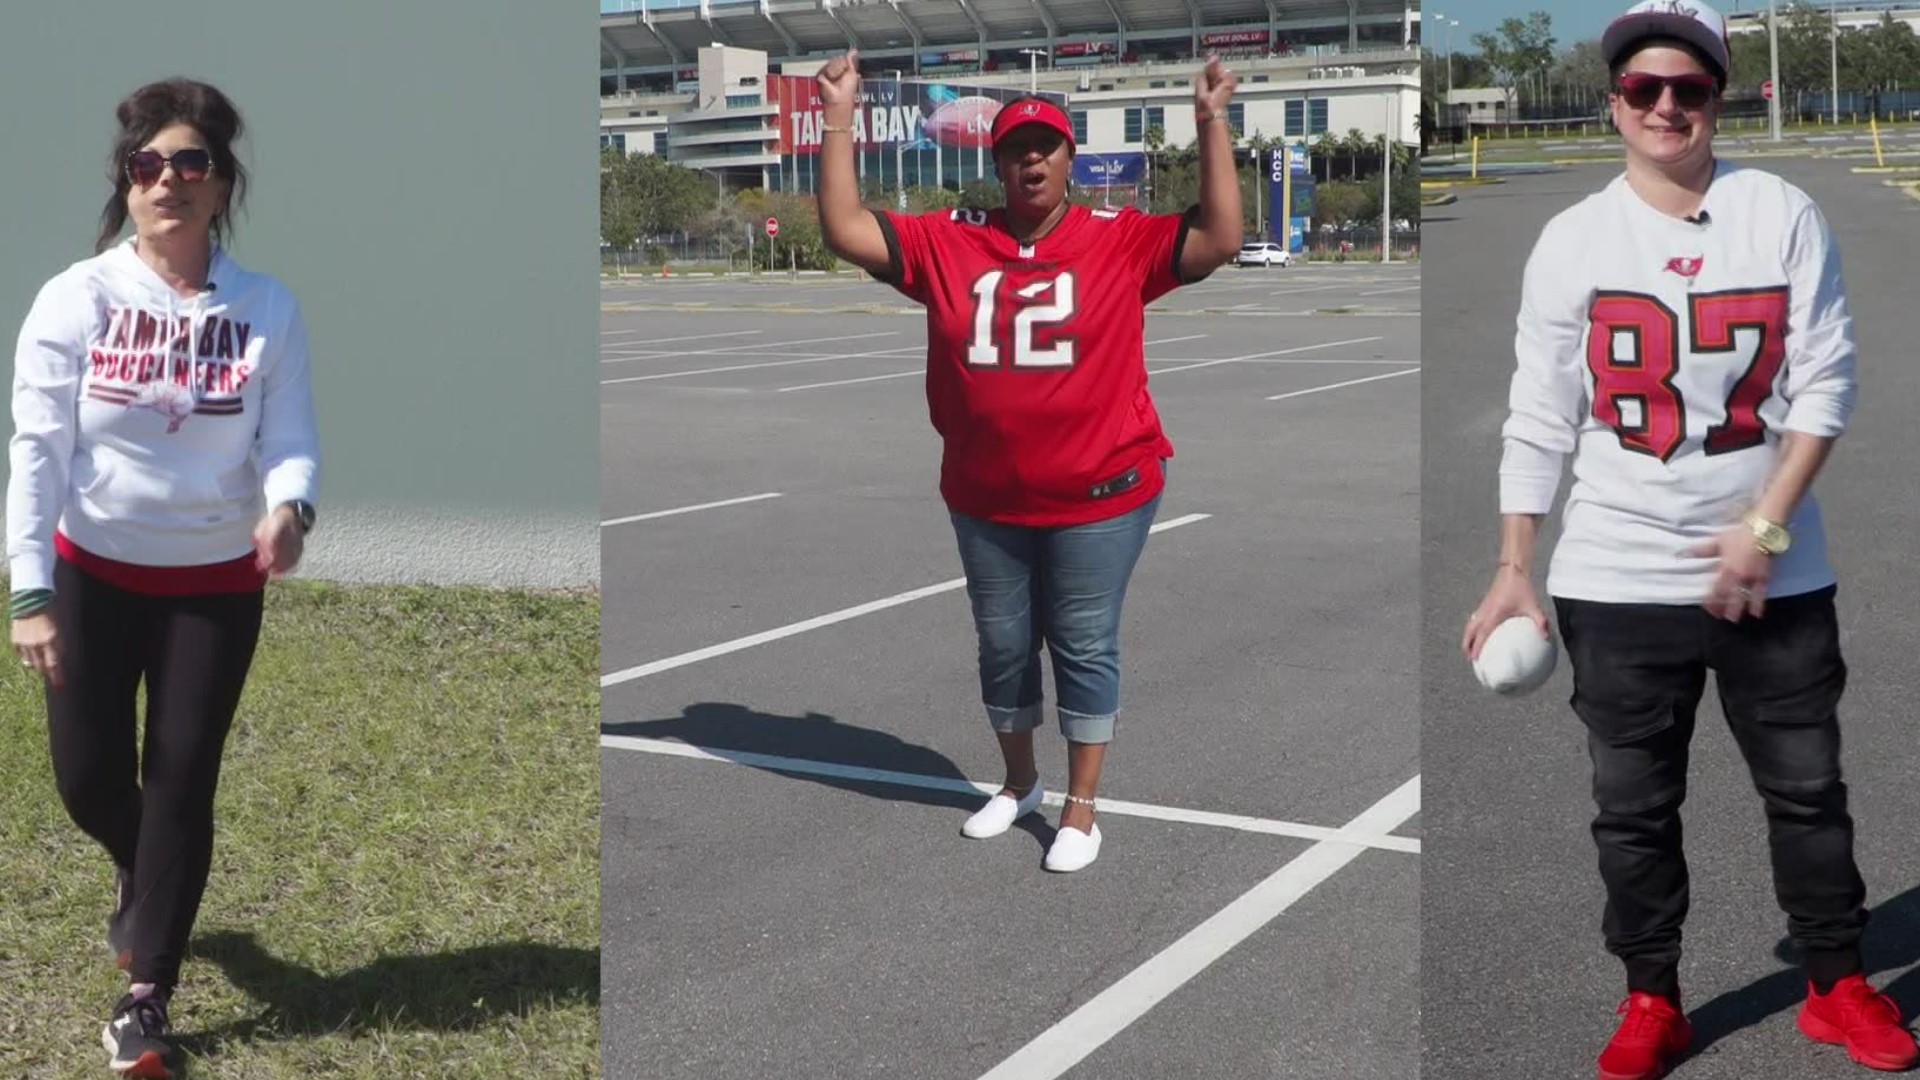 7,500 healthcare workers attended the big game at Raymond James Stadium. We caught up with three workers who showed us what it was like on the inside.